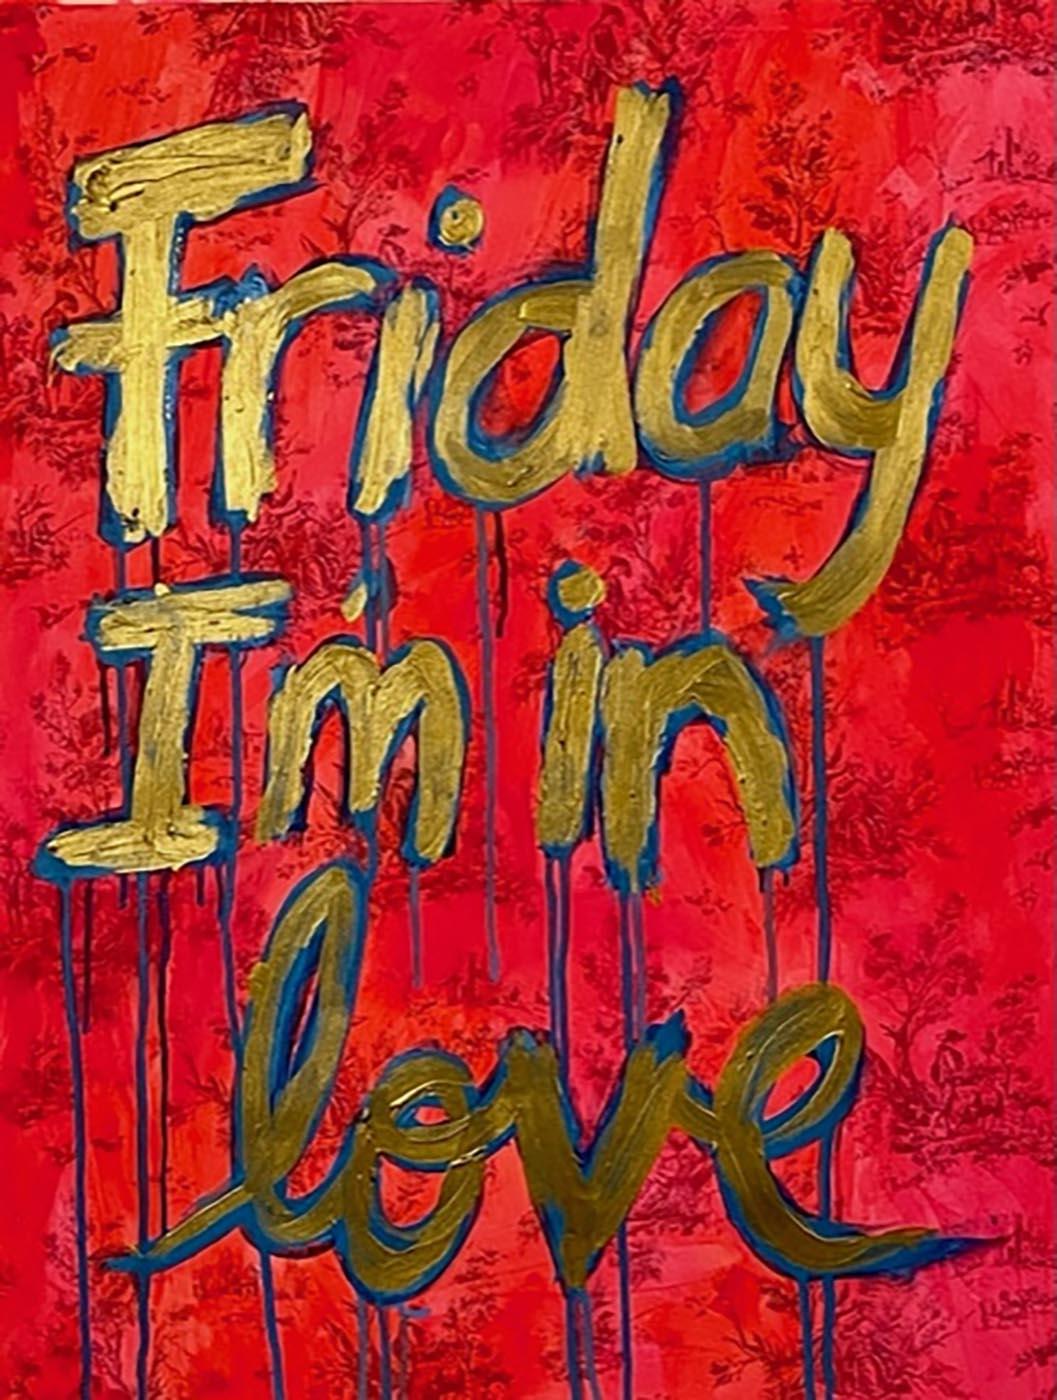 Friday I'm in Love (red gold)